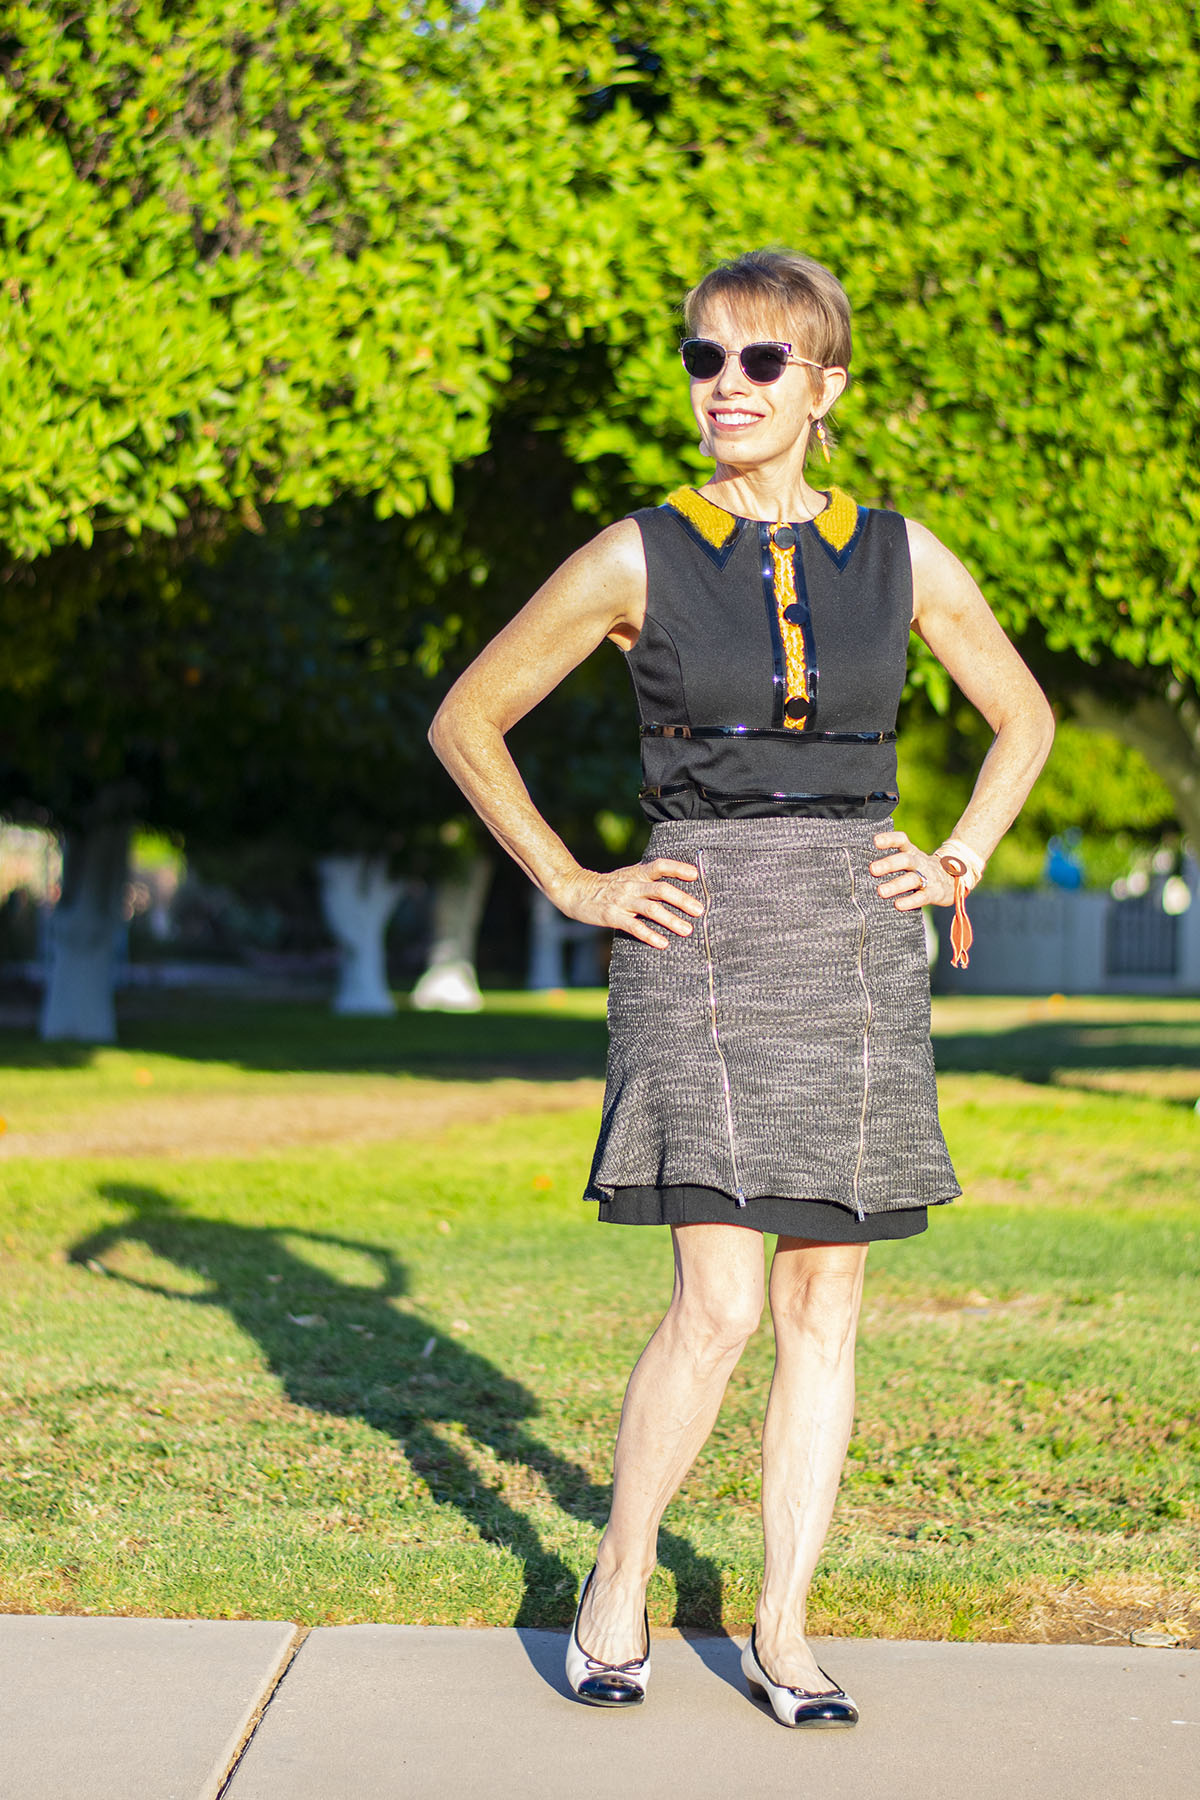 How to Wear a Short Skirt Modestly